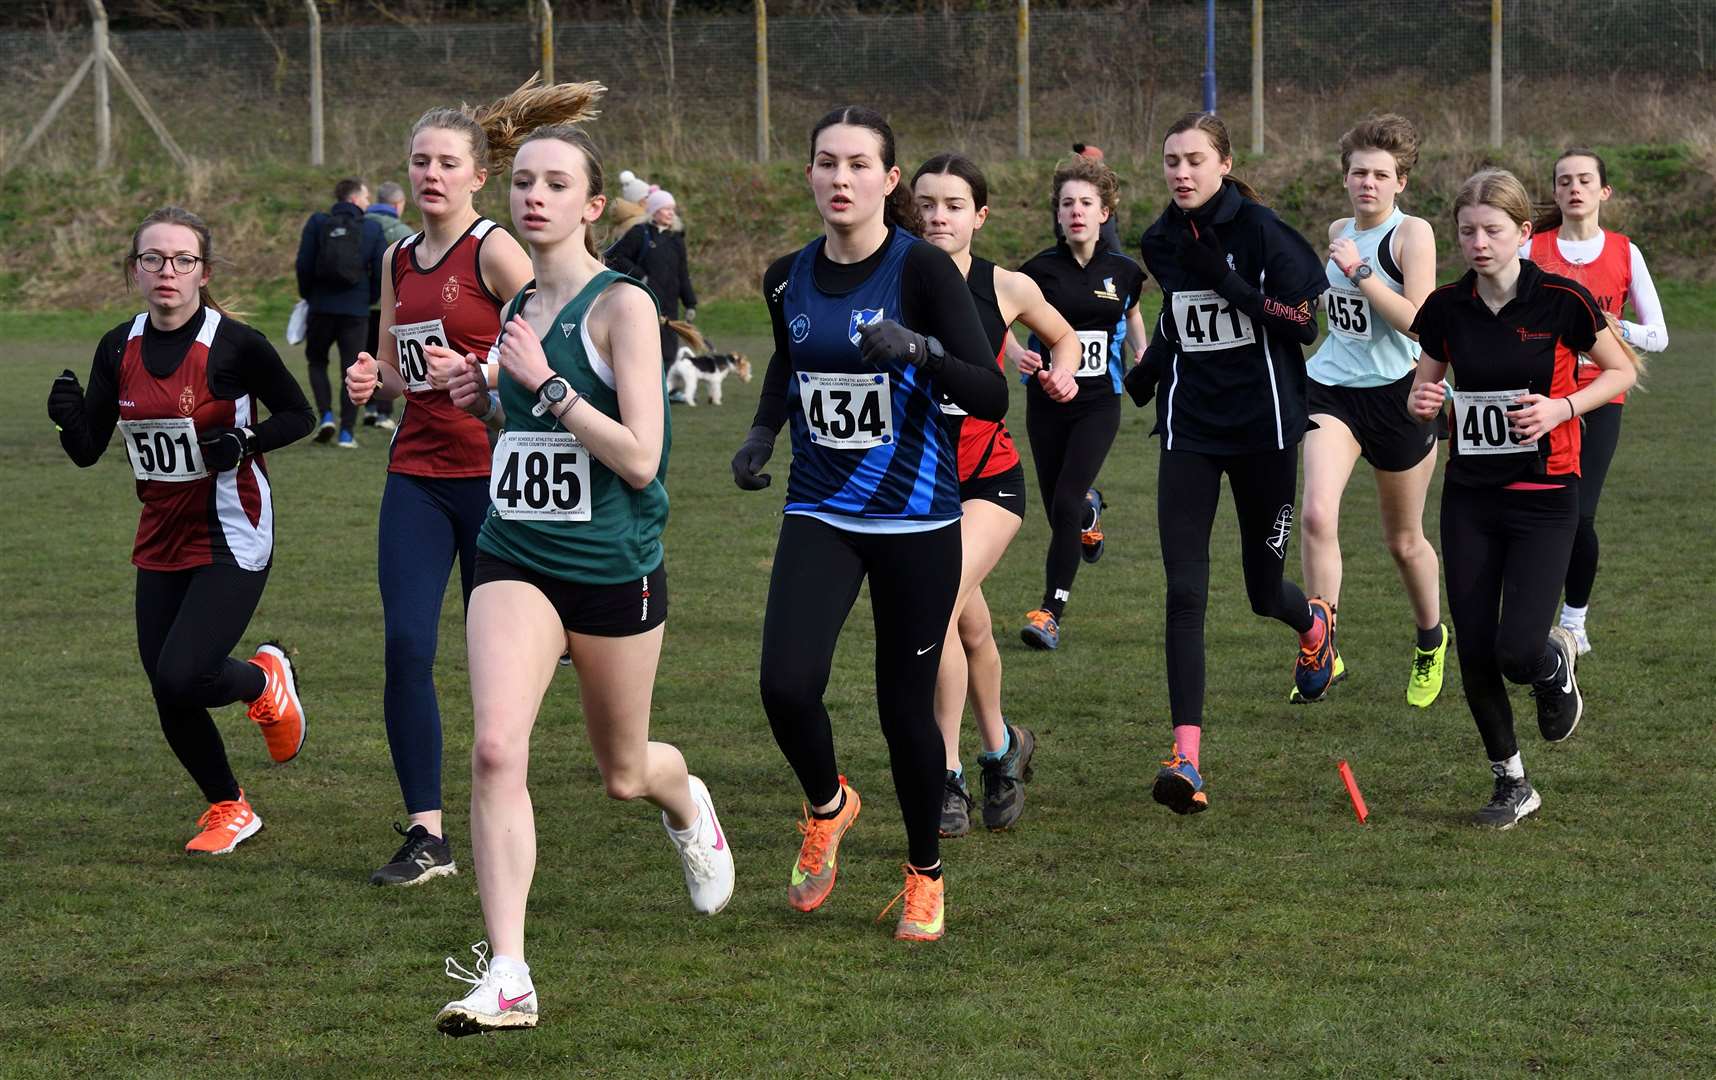 South East Kent’s Niamh Paterson taking part in the intermediate girls’ race. Picture: Simon Hildrew